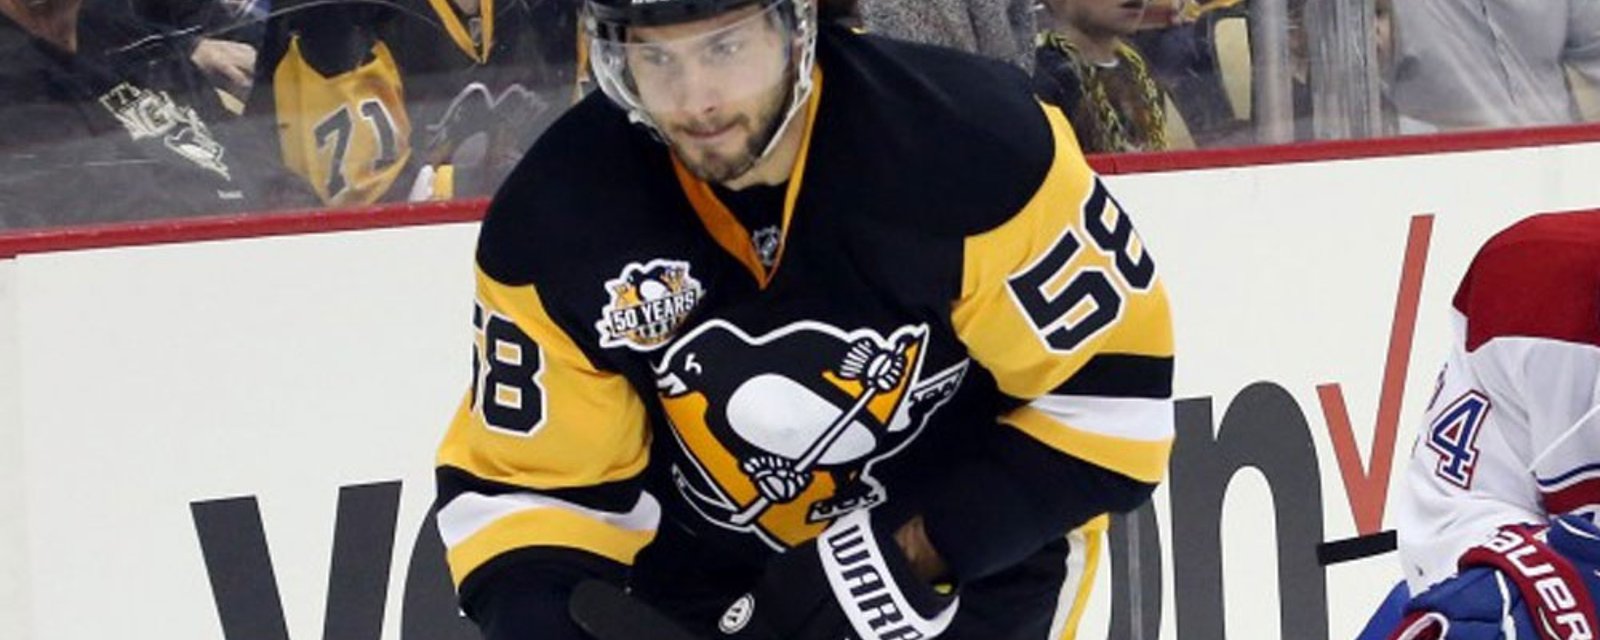 New, crucial information regarding Kristopher Letang's time in Pittsburgh